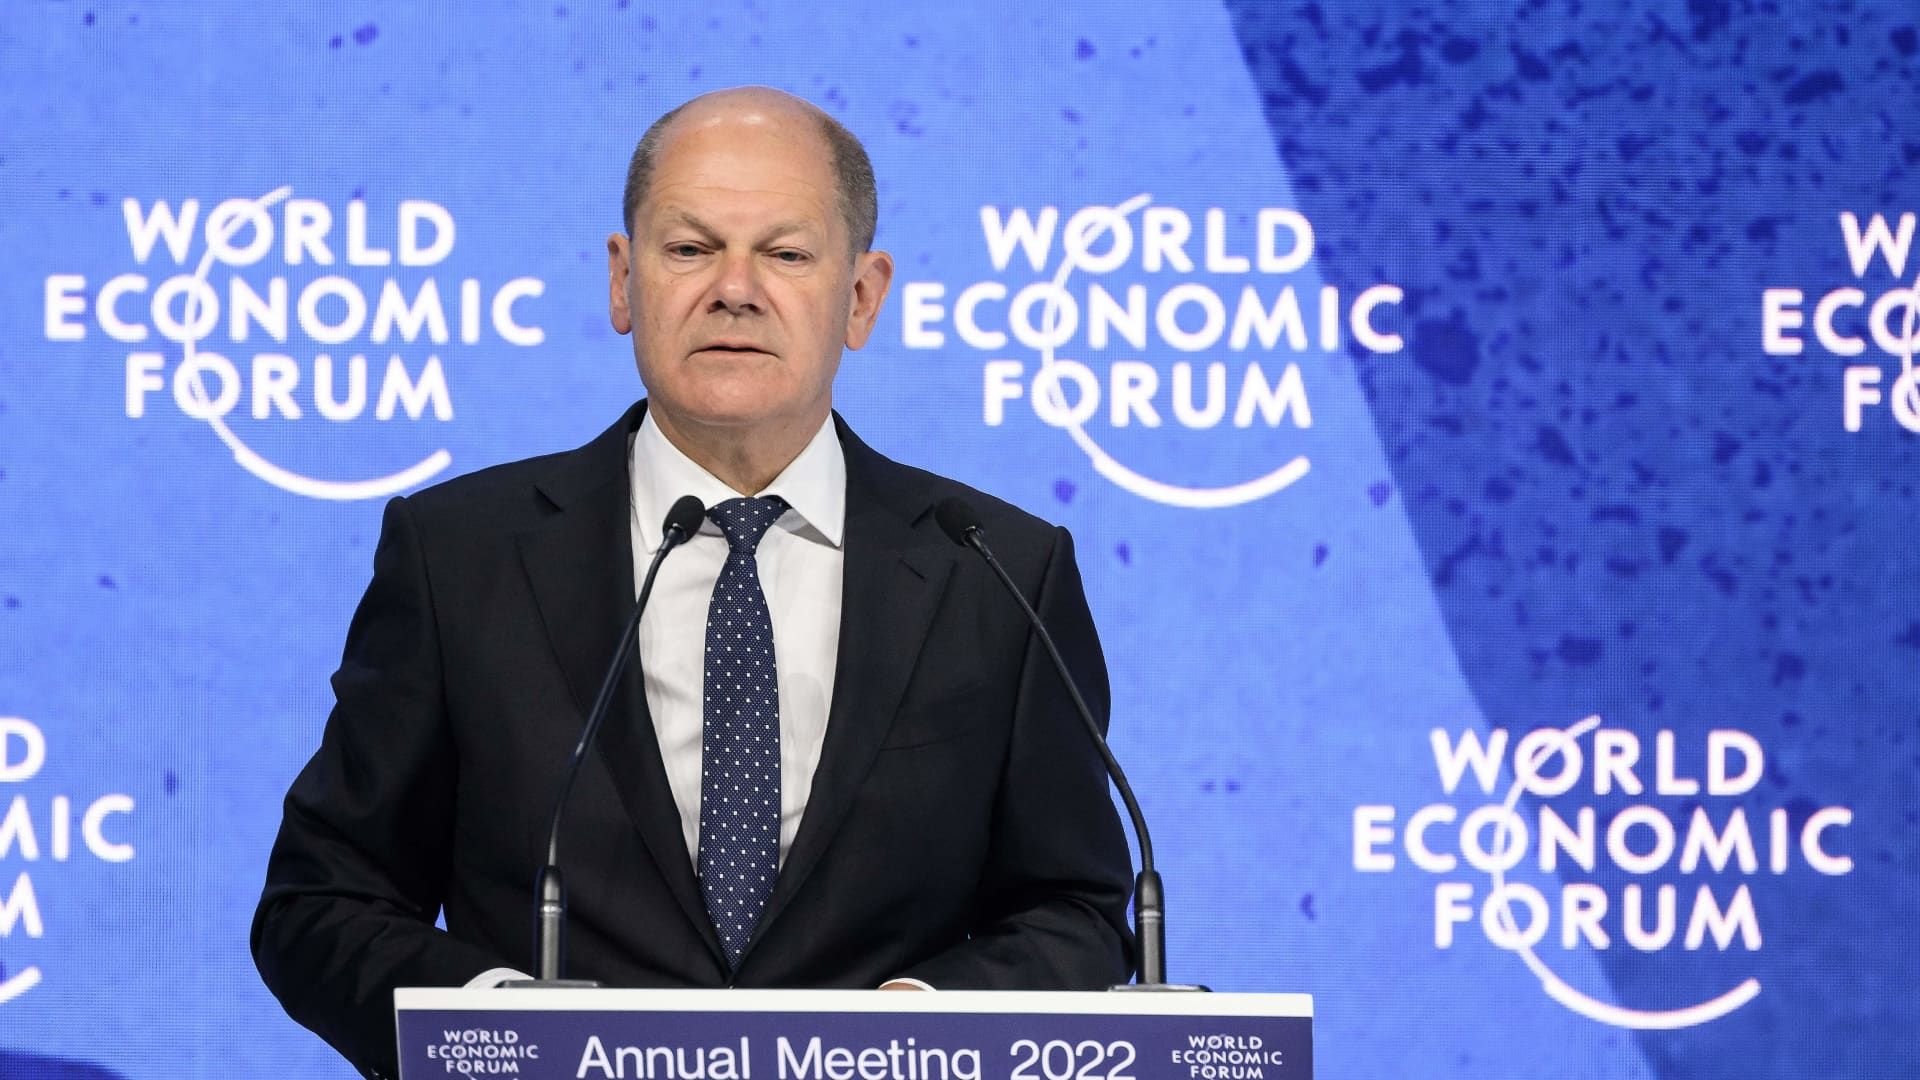 German Chancellor Olaf Scholz addresses the assembly during the World Economic Forum (WEF) annual meeting in Davos on May 26, 2022.